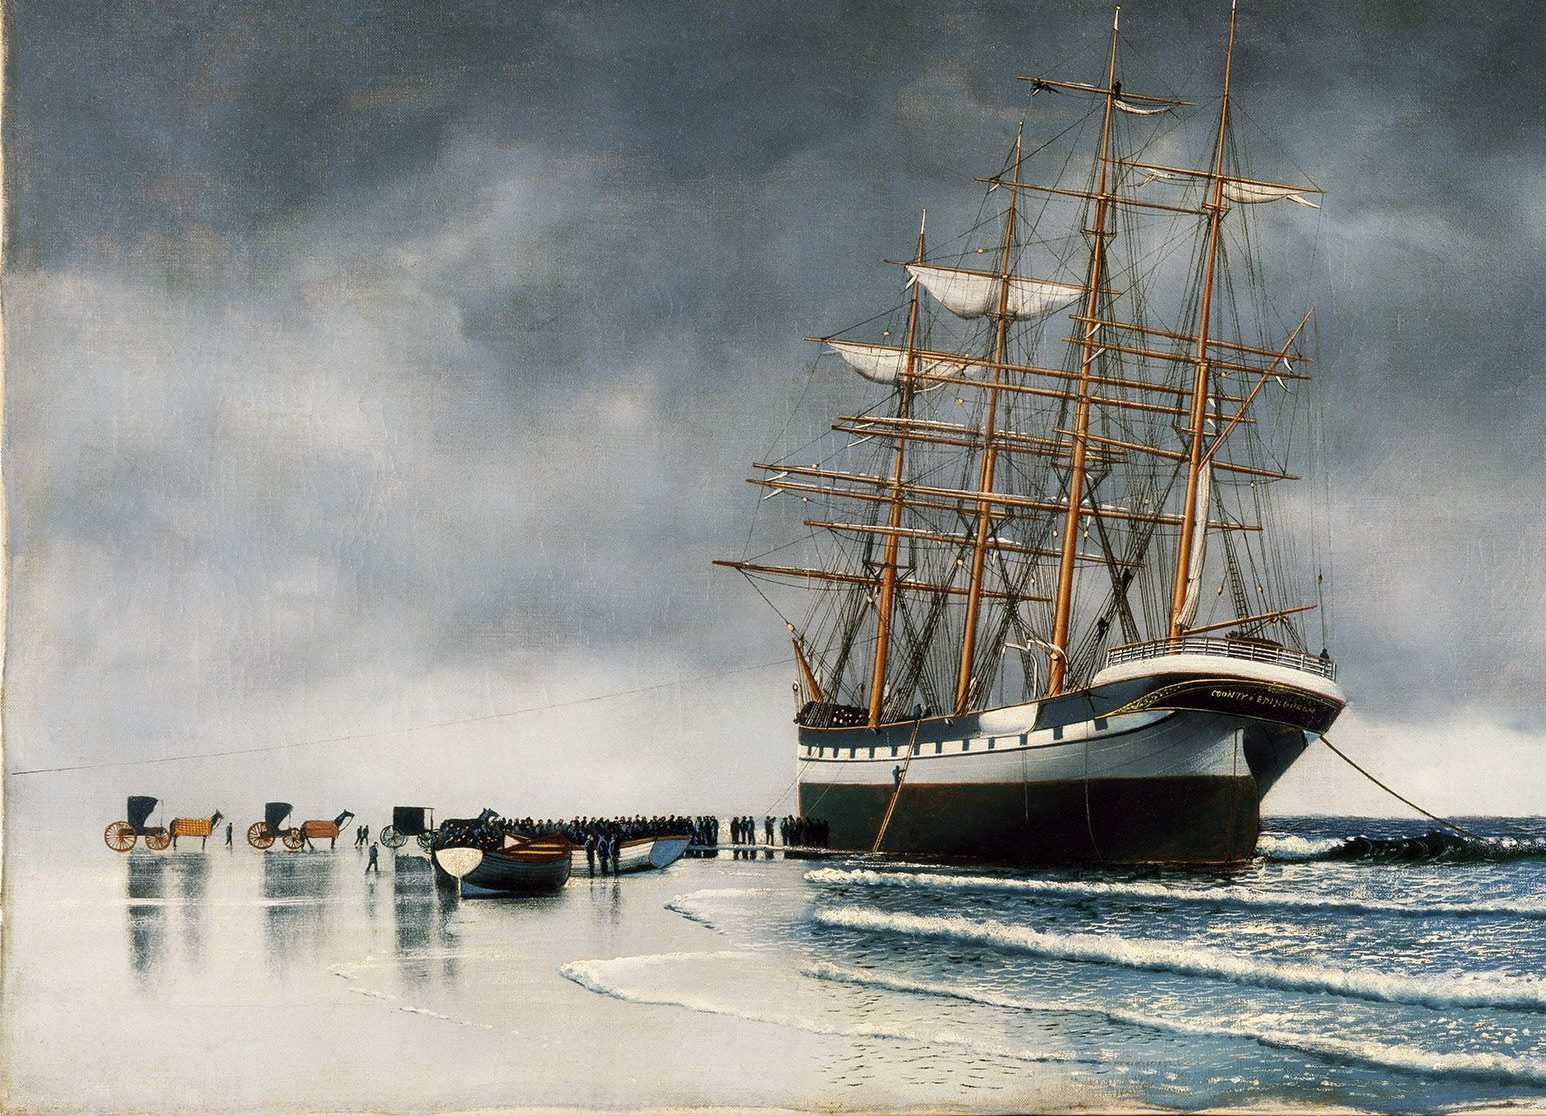 Painting of a sailboat run aground on the beach. Large crowd of people on the beach.